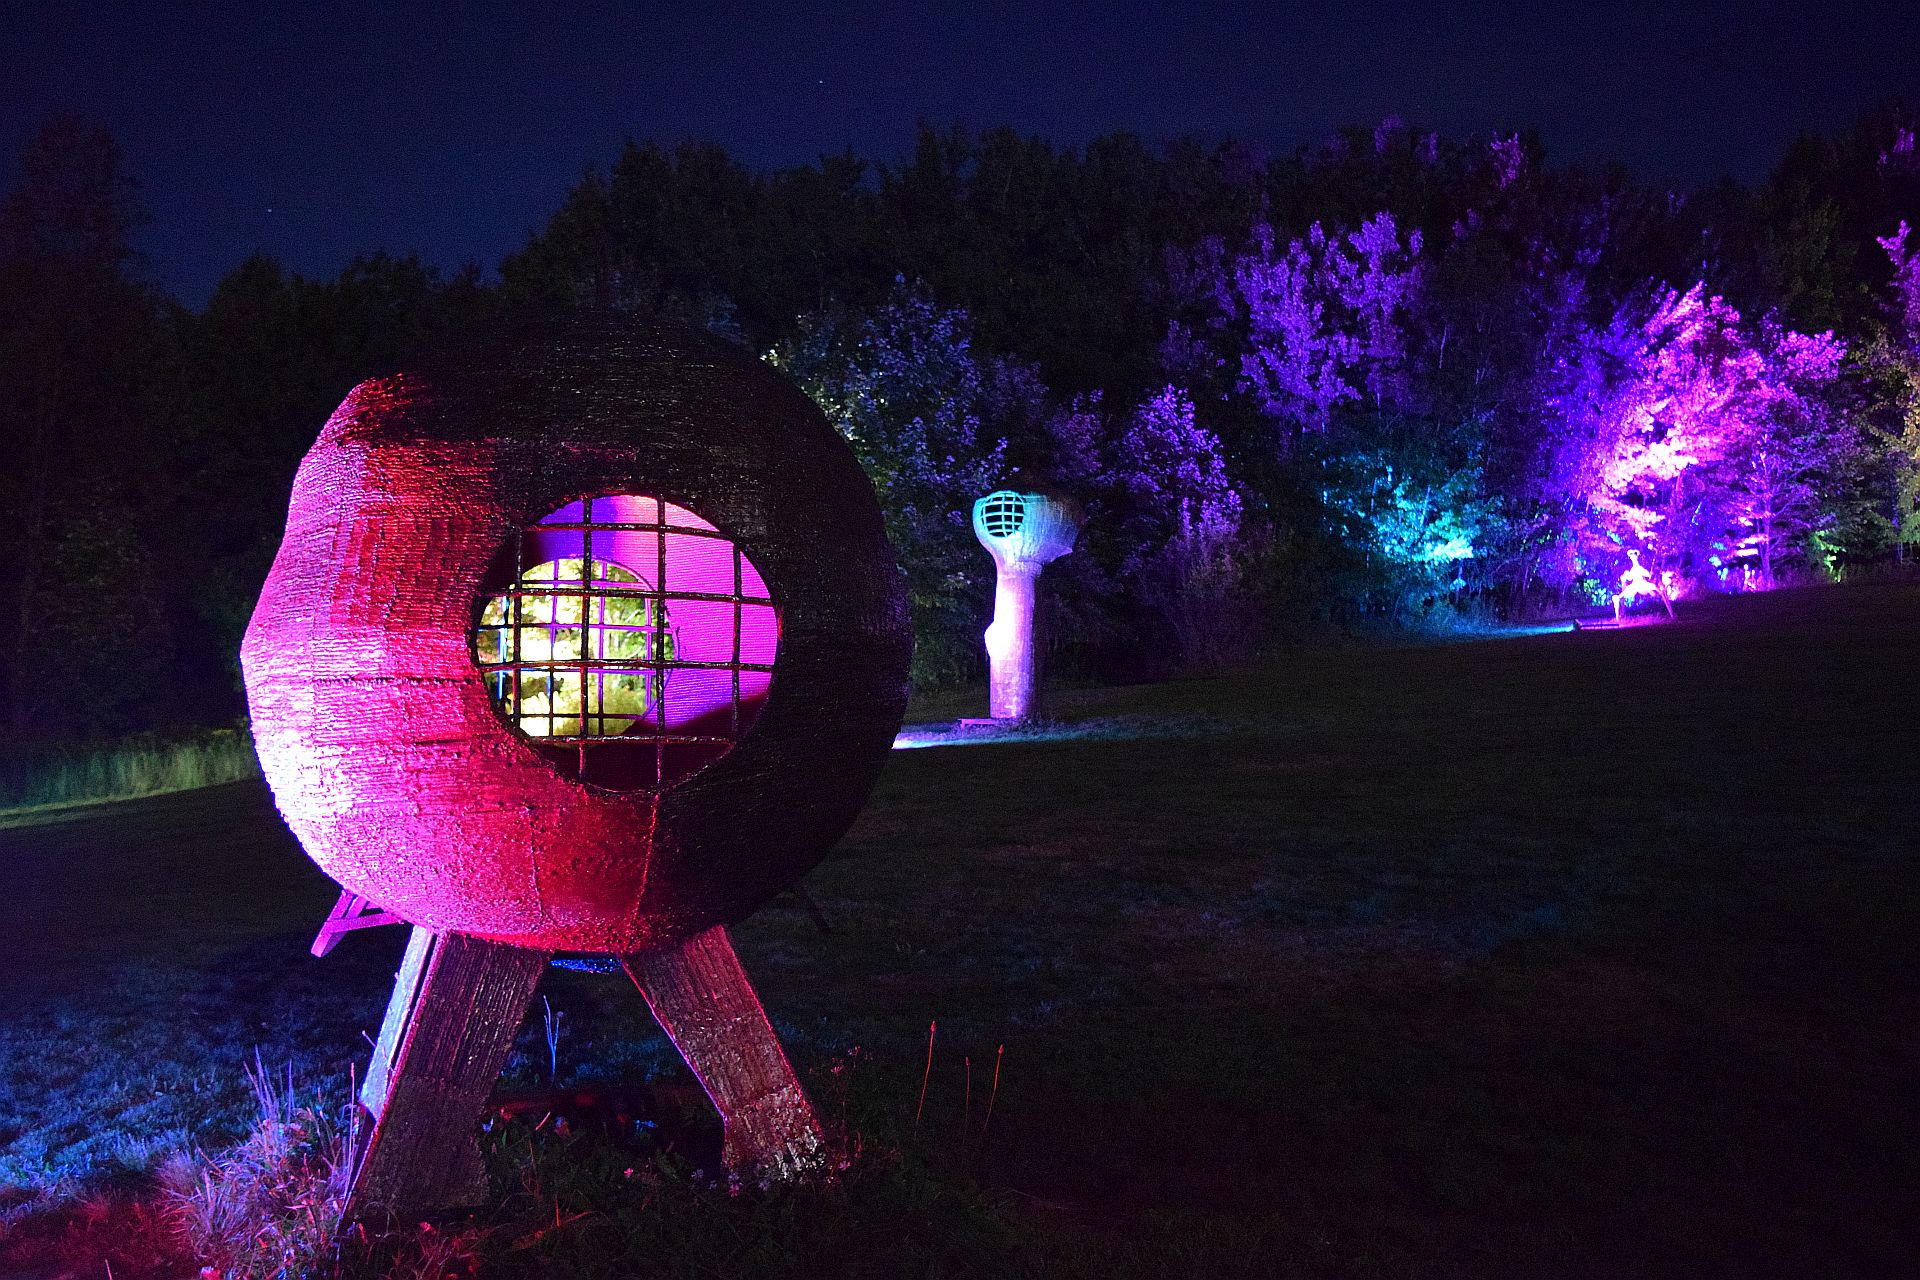 SitlerHQ produced NIGHT LIGHTS at Griffis Sculpture Park returns for 7th year